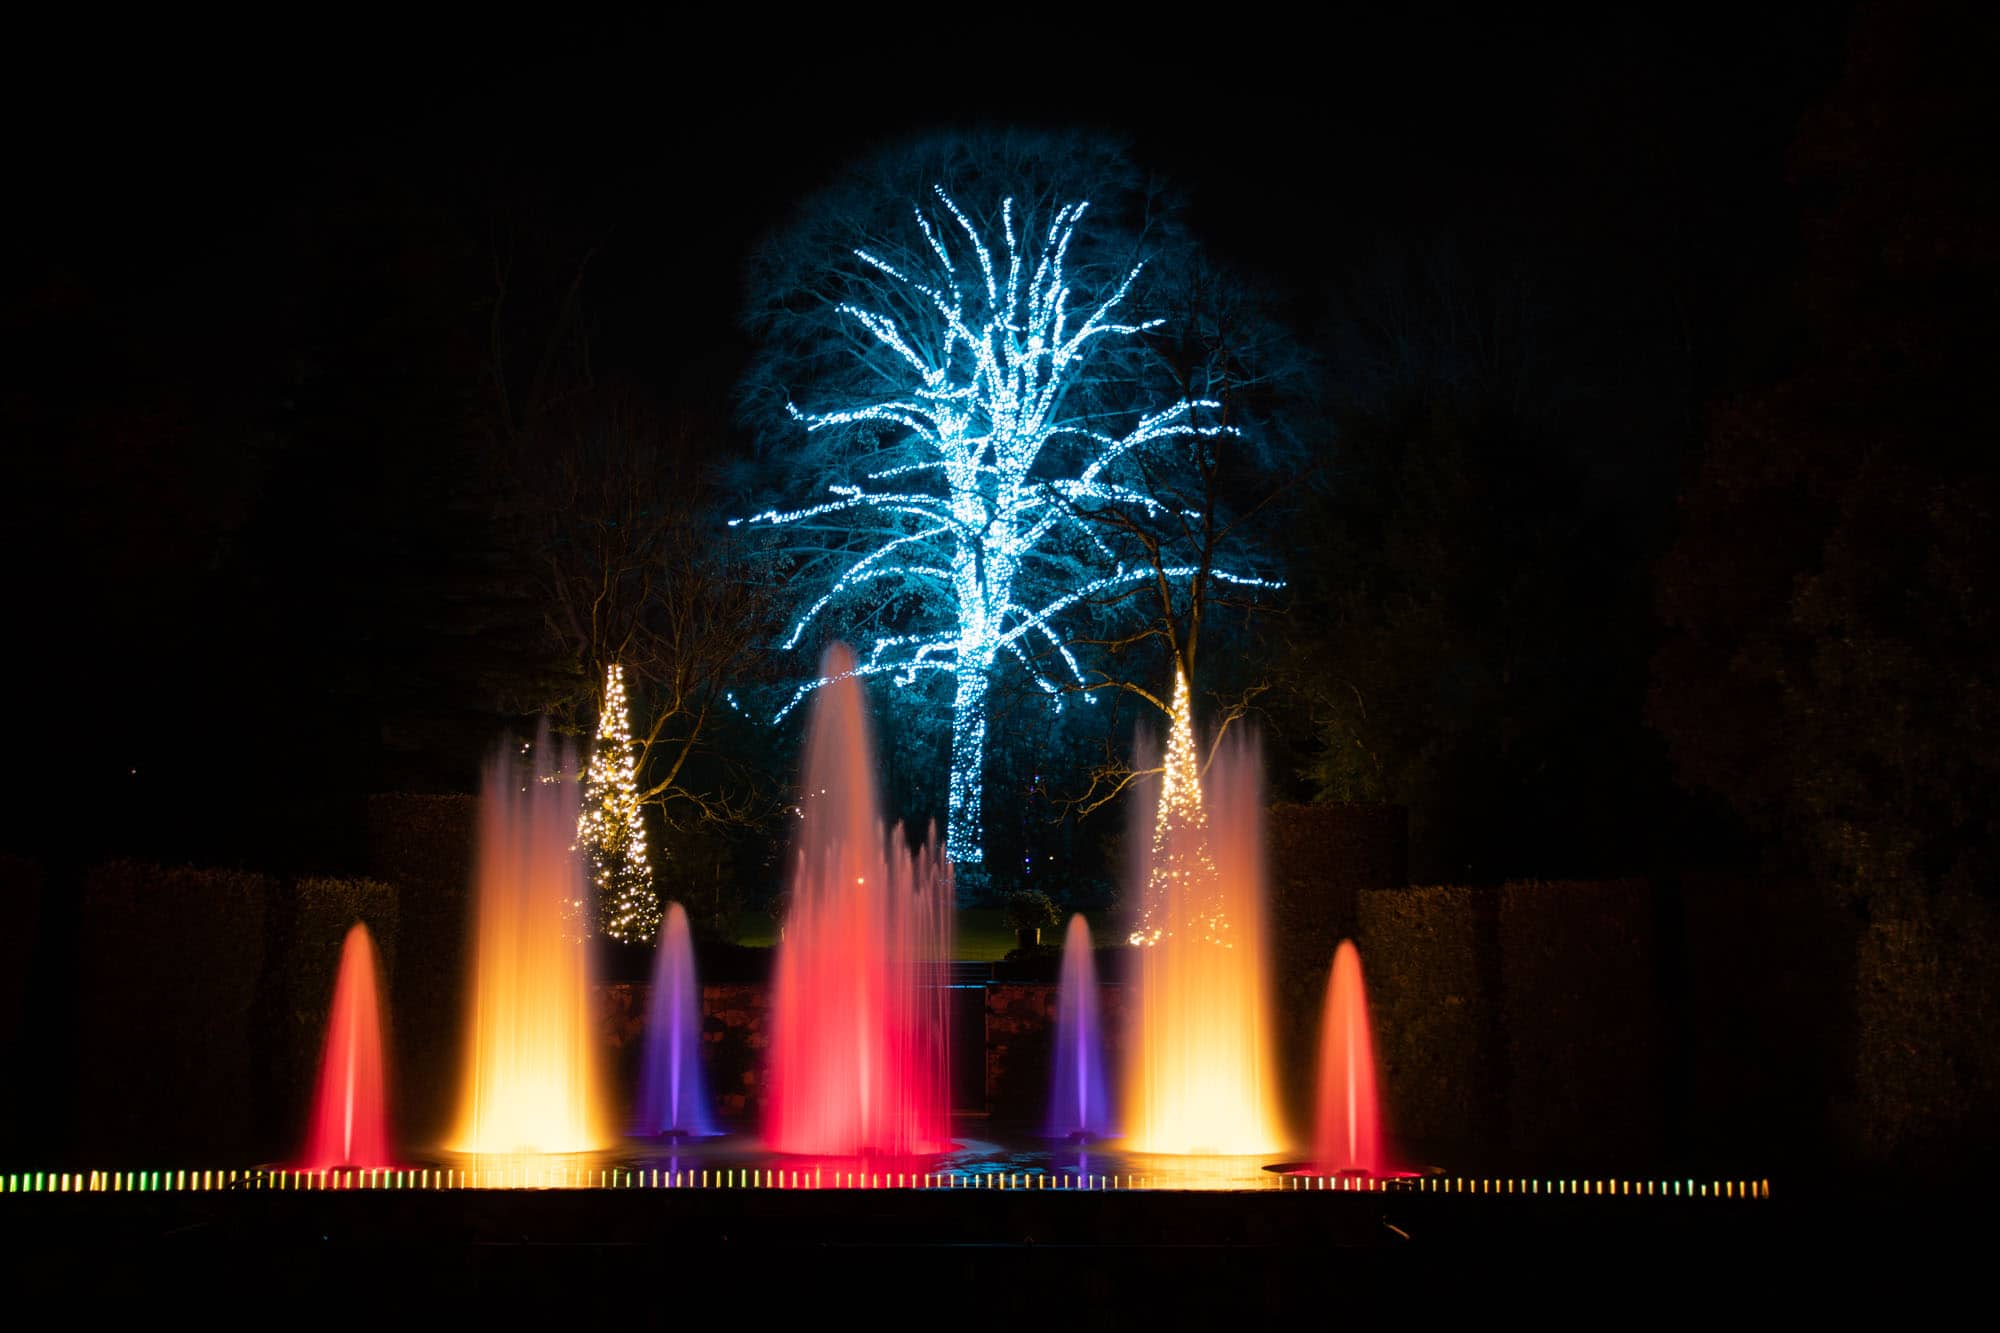 Water jets from a fountain lit with red and white lights in front of an illuminated tree